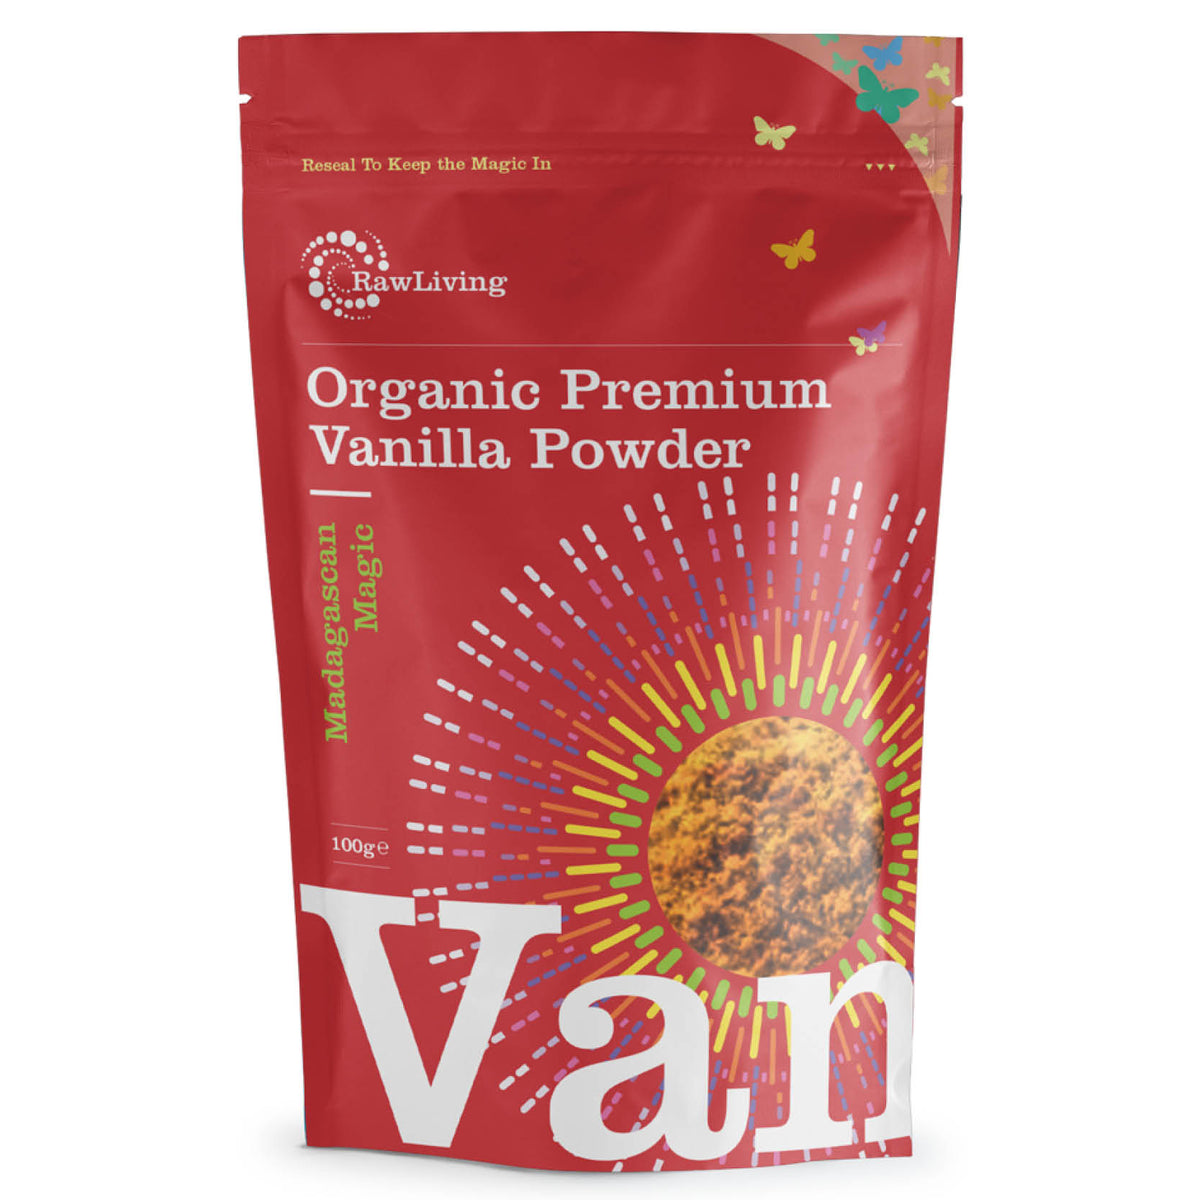 Organic Vanilla Powder | Raw Living UK | Raw Foods | Super Foods | Natural Sweeteners | Raw Living Organic Madagascan Premium Vanilla Powder is delicious in Chocolate, Smoothies, Cakes &amp; Bars. Add a spoonful to your creations for potent flavour.